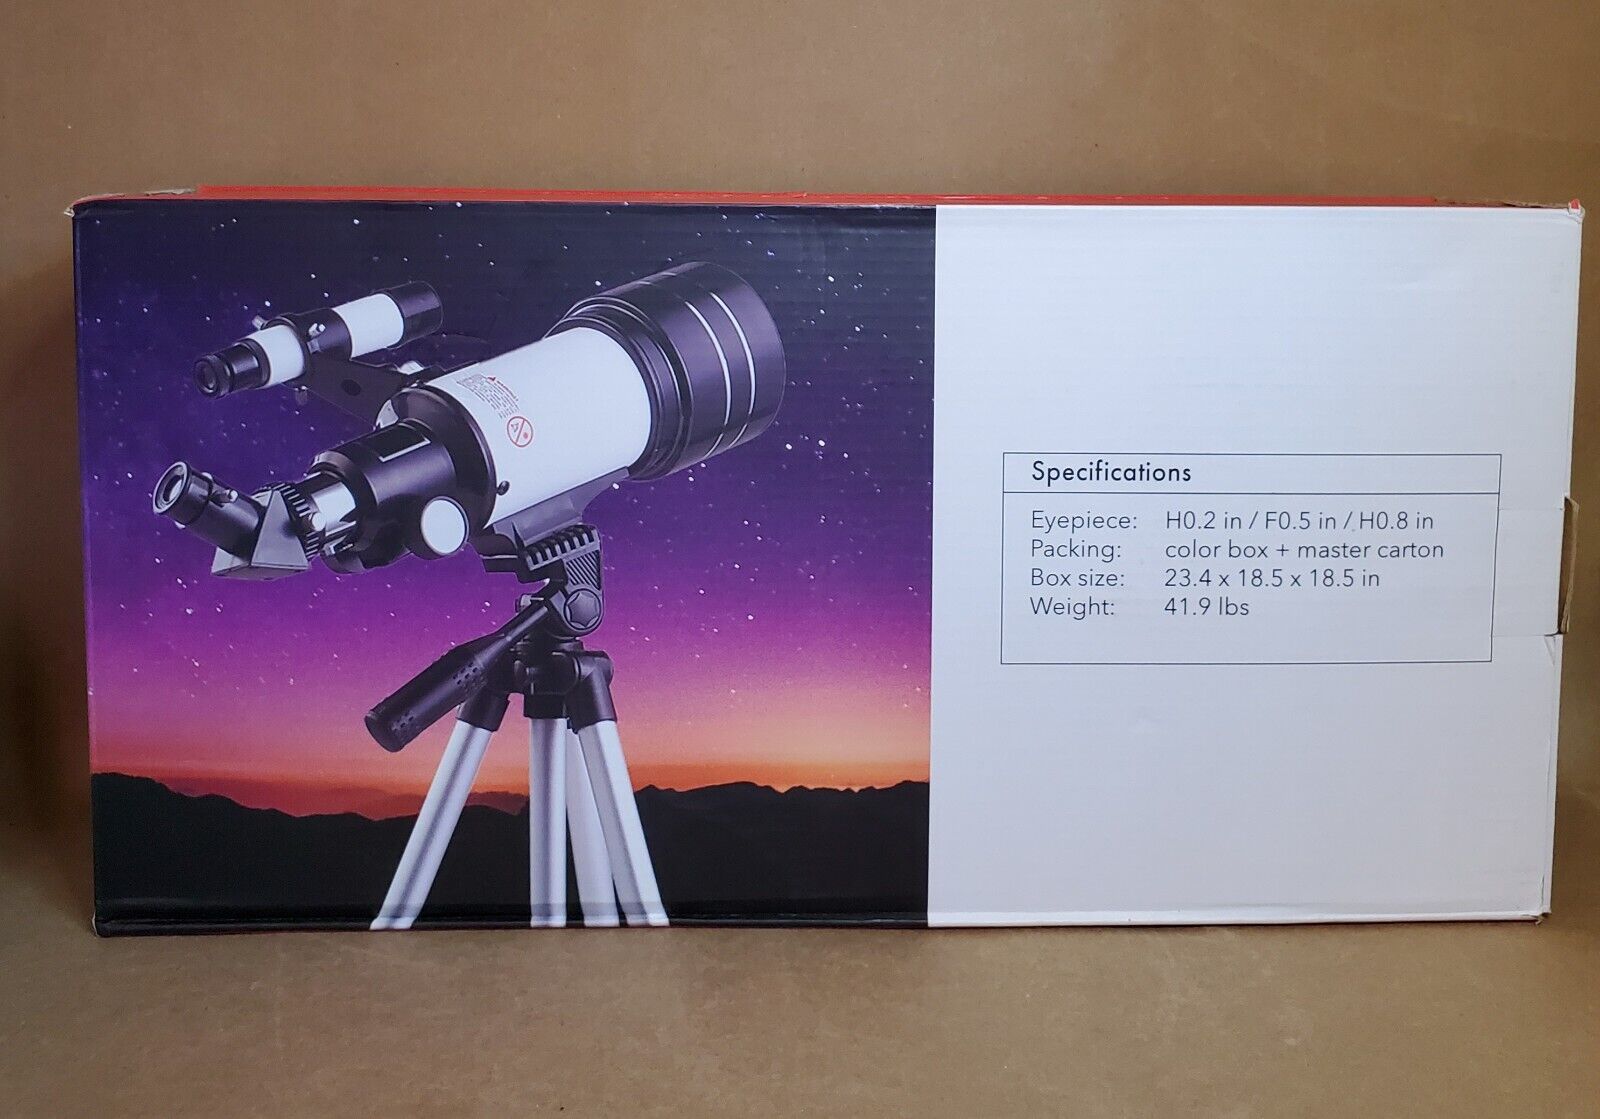 NEW Dartwood Day/Night Astronomical Telescope w/3 Eye Pieces & Remote for Photo 